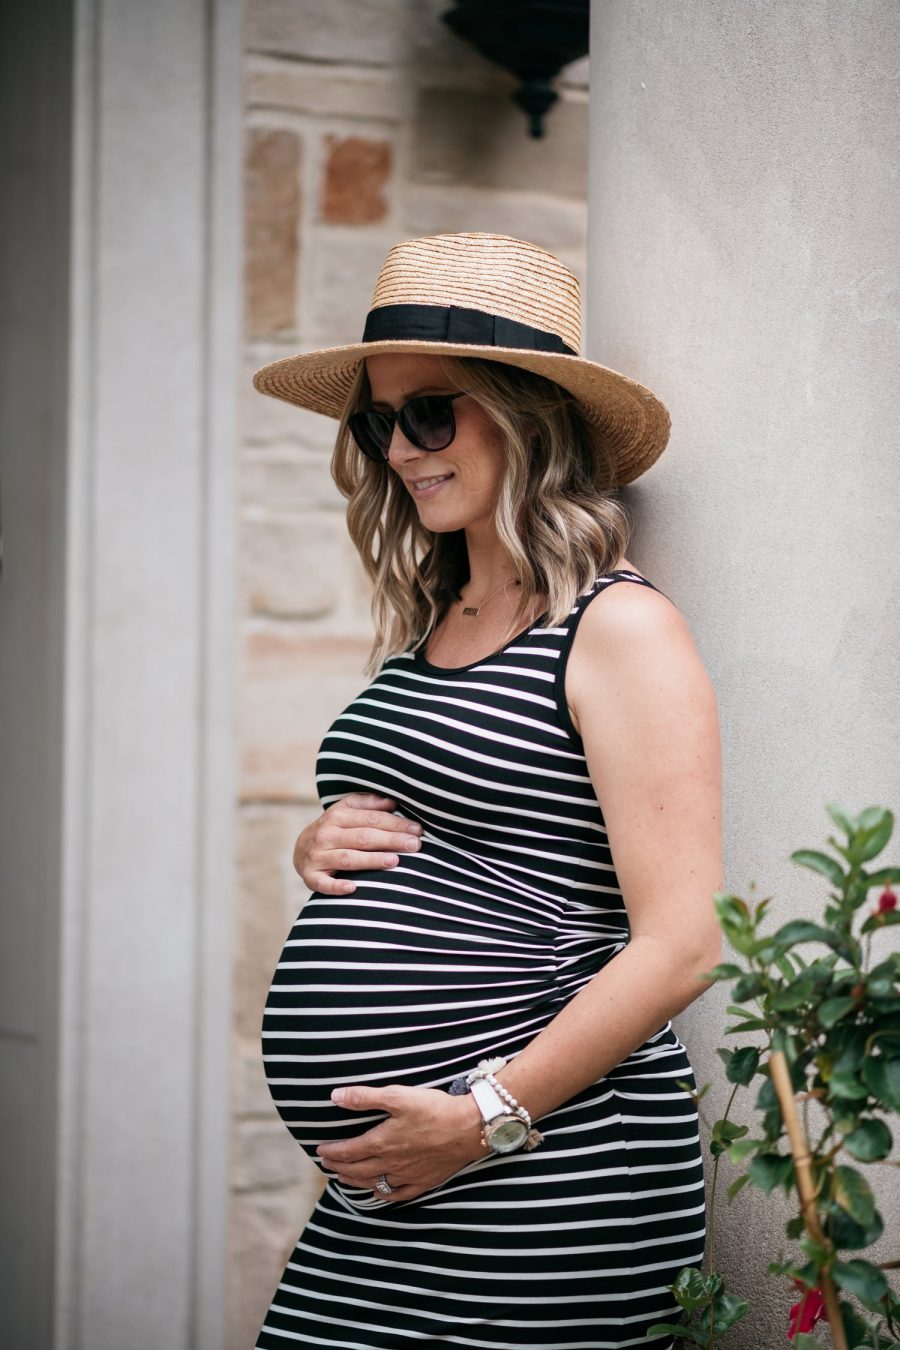 Maternity style: maxi dress and hat